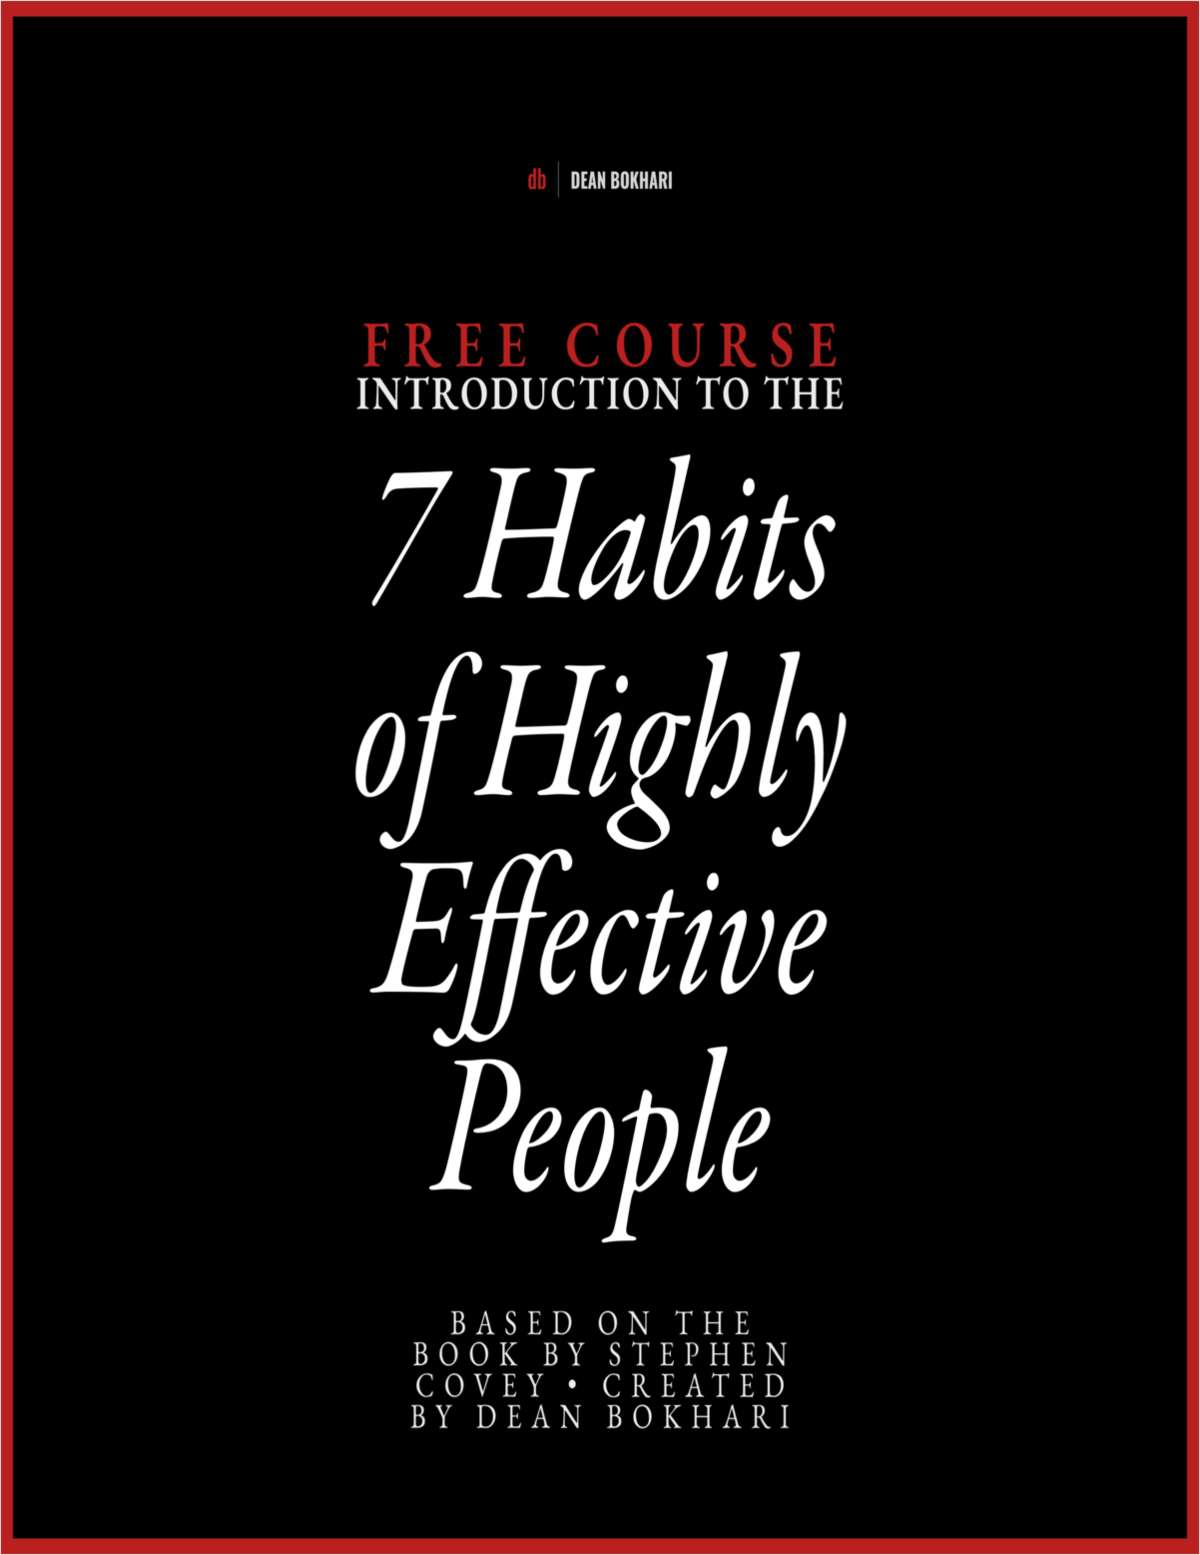 Course: Introduction to The 7 Habits of Highly Effective People